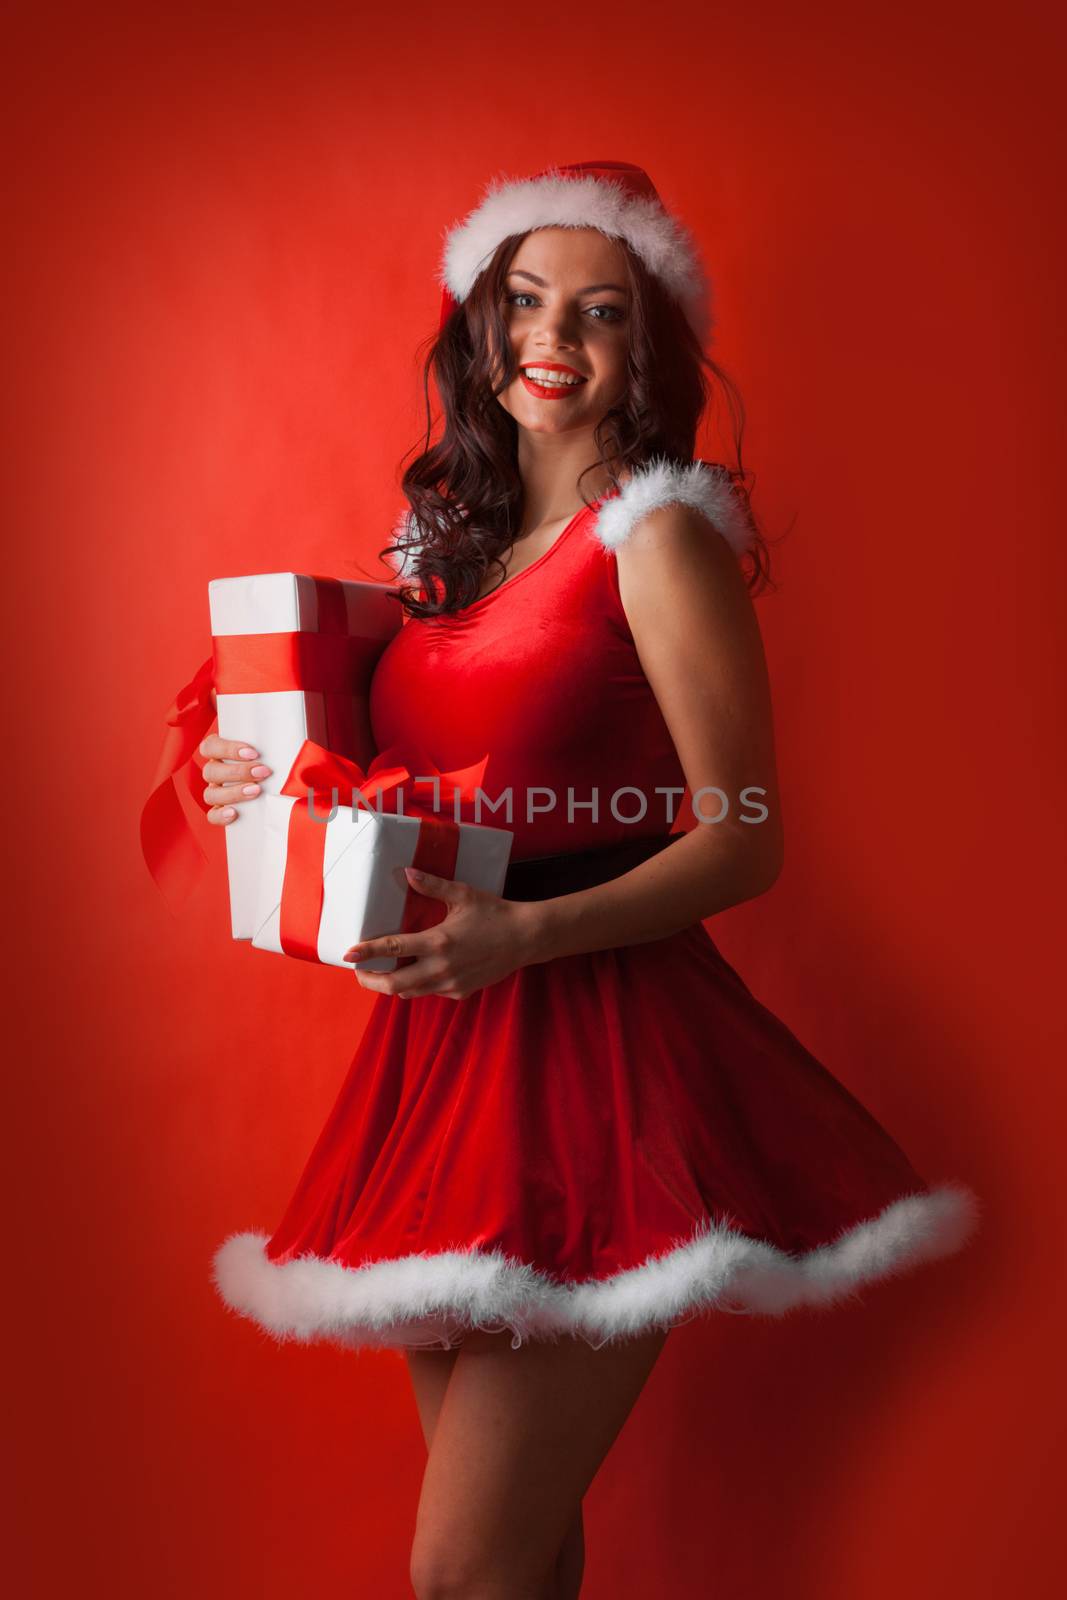 Beautiful young woman in Santa dress and hat celebrating Christmas holding gift boxes